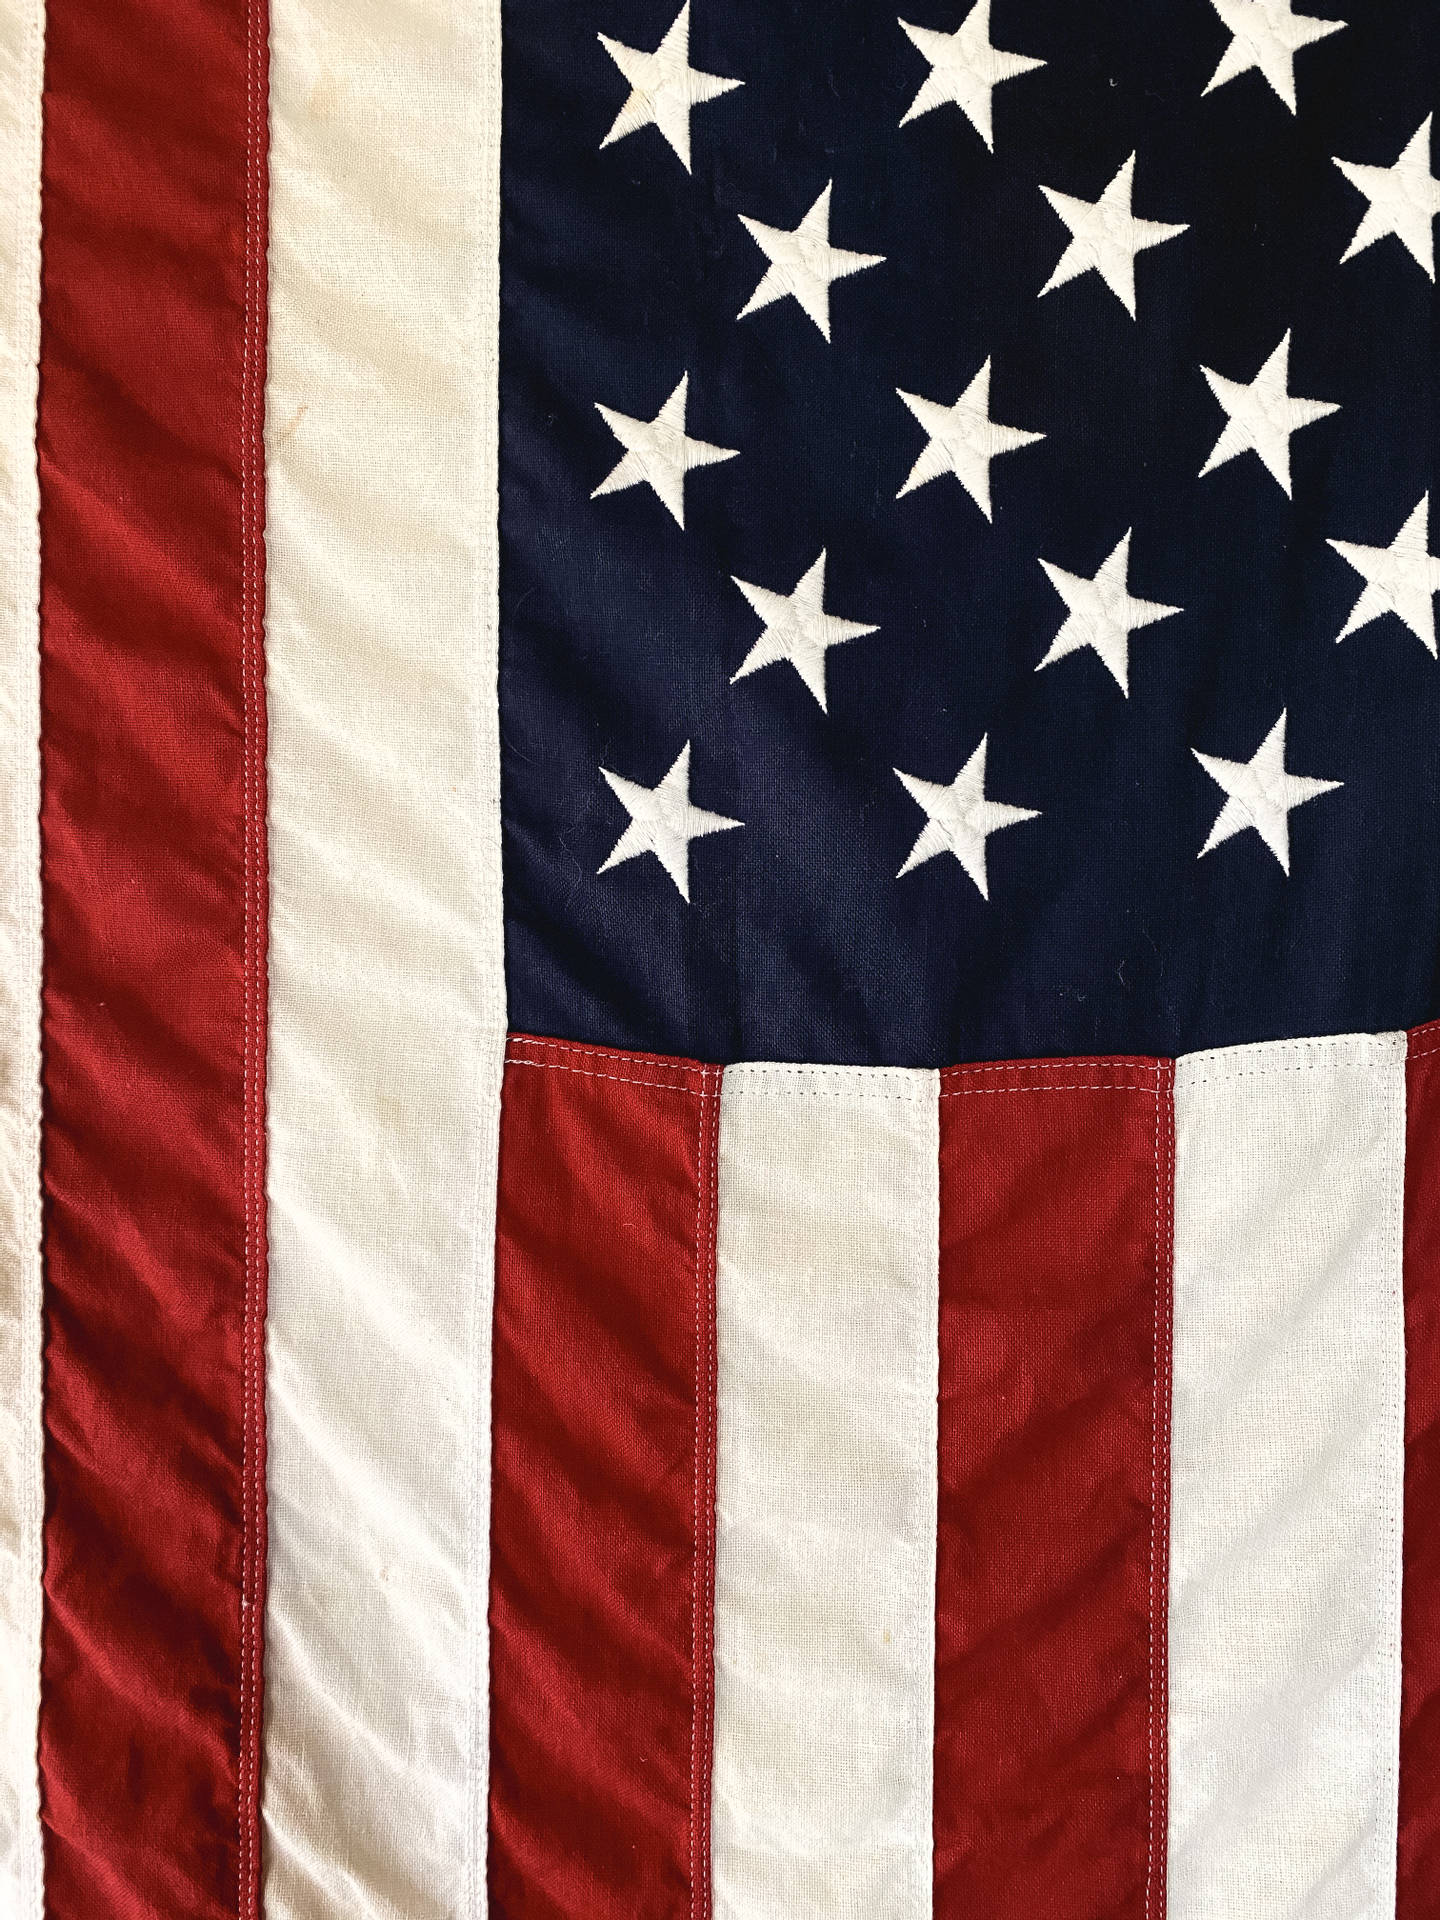 3024X4032 American Flag Wallpaper and Background